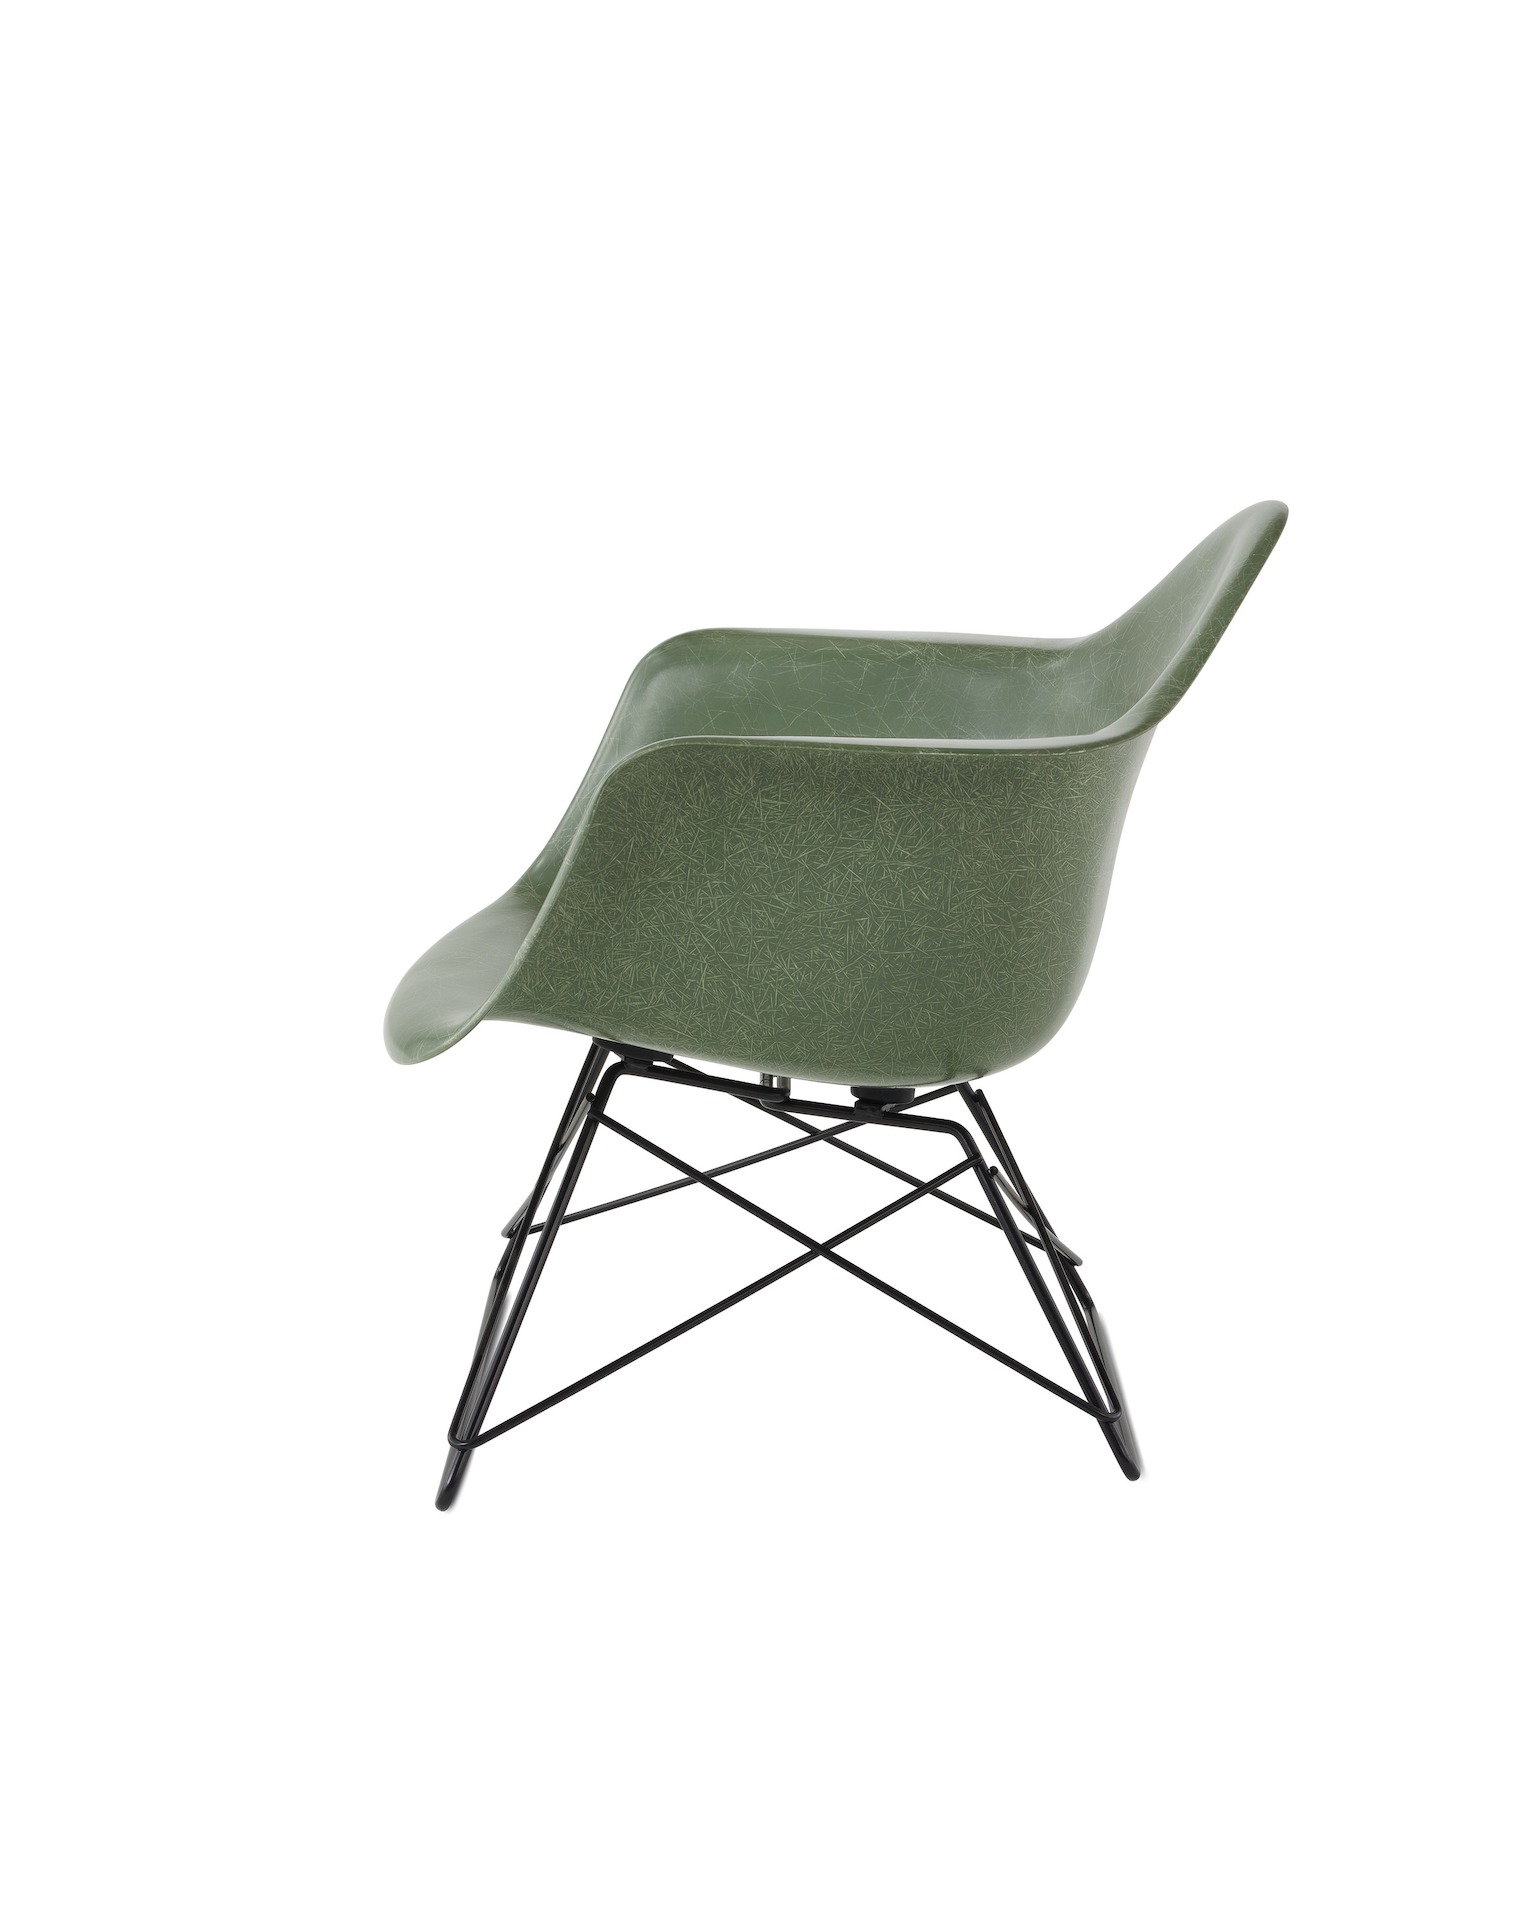 An Eames Molded Fiberglass Armchair with a low wire base, viewed from the side.